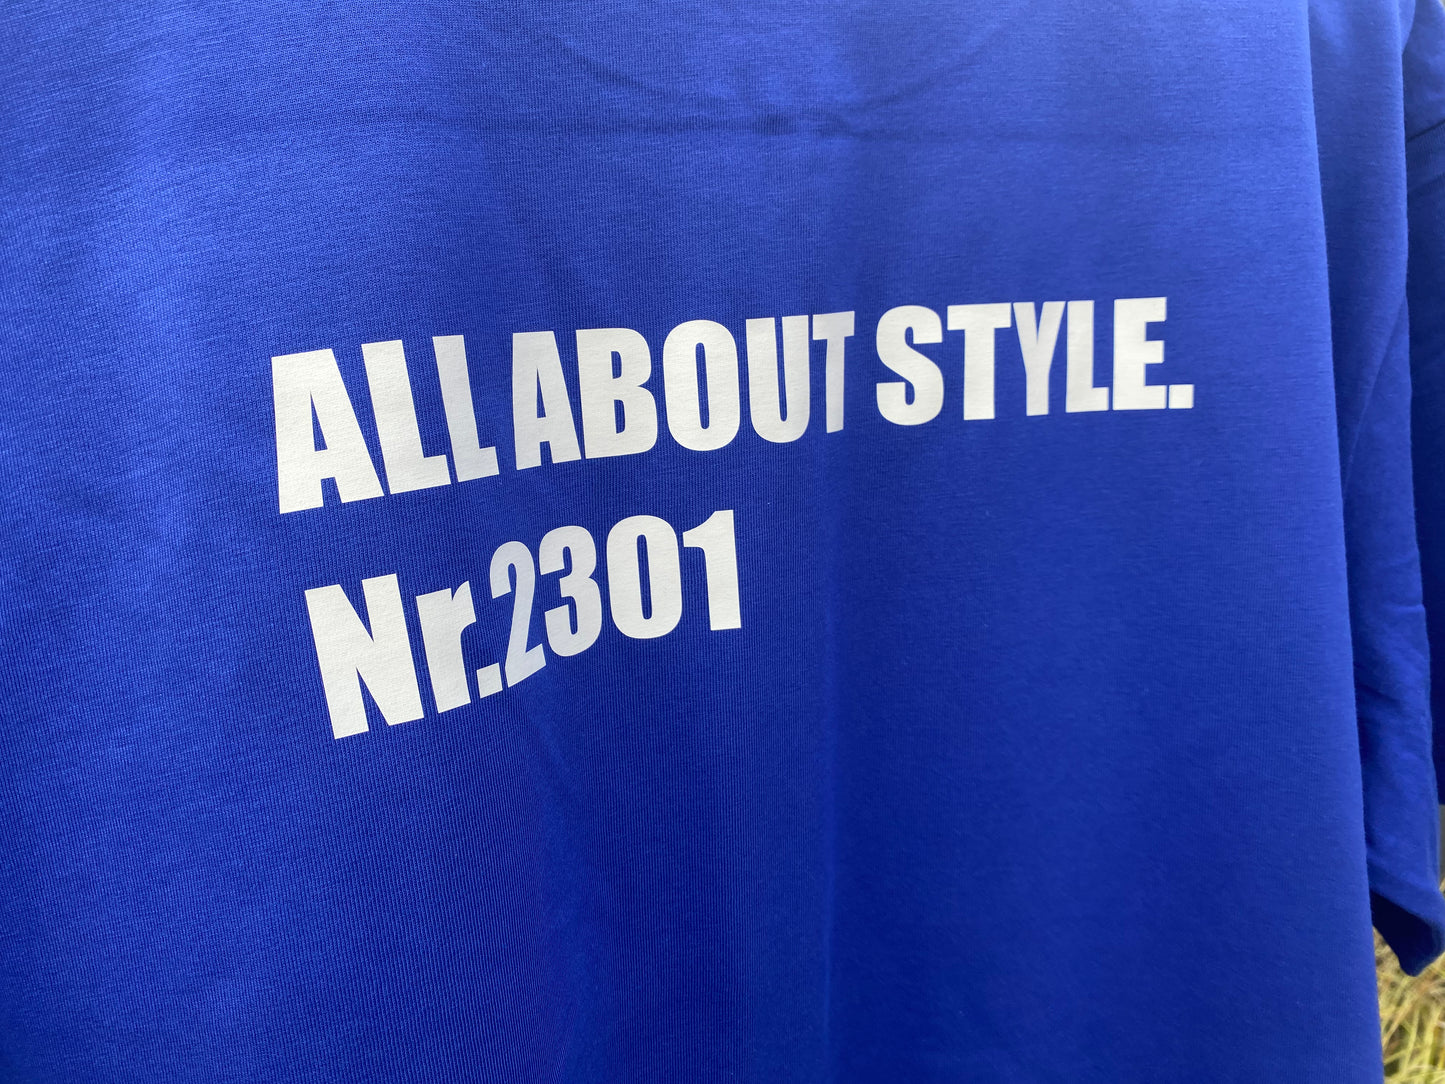 SVIRE T-Shirt Blue -ABSTYLE-